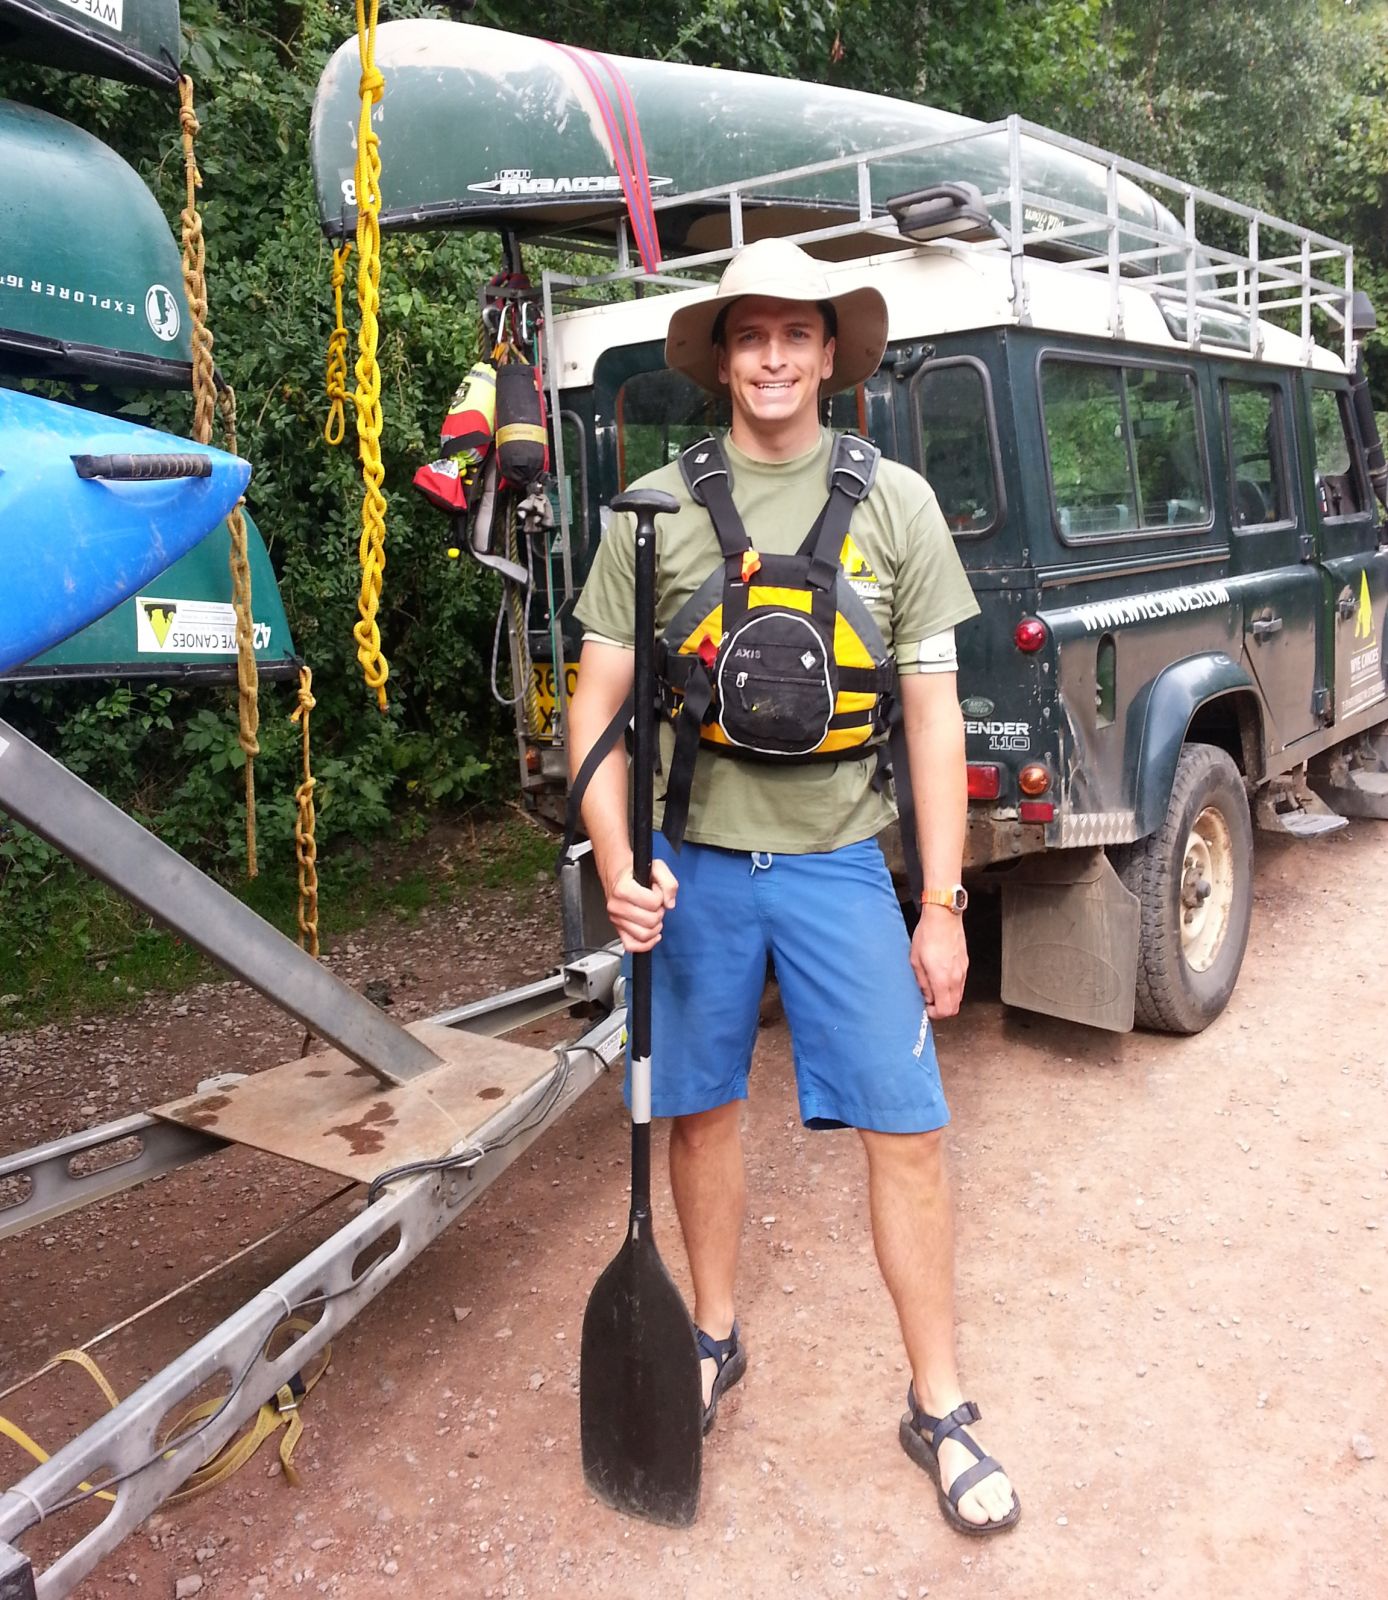 A Wye Canoes River Guide